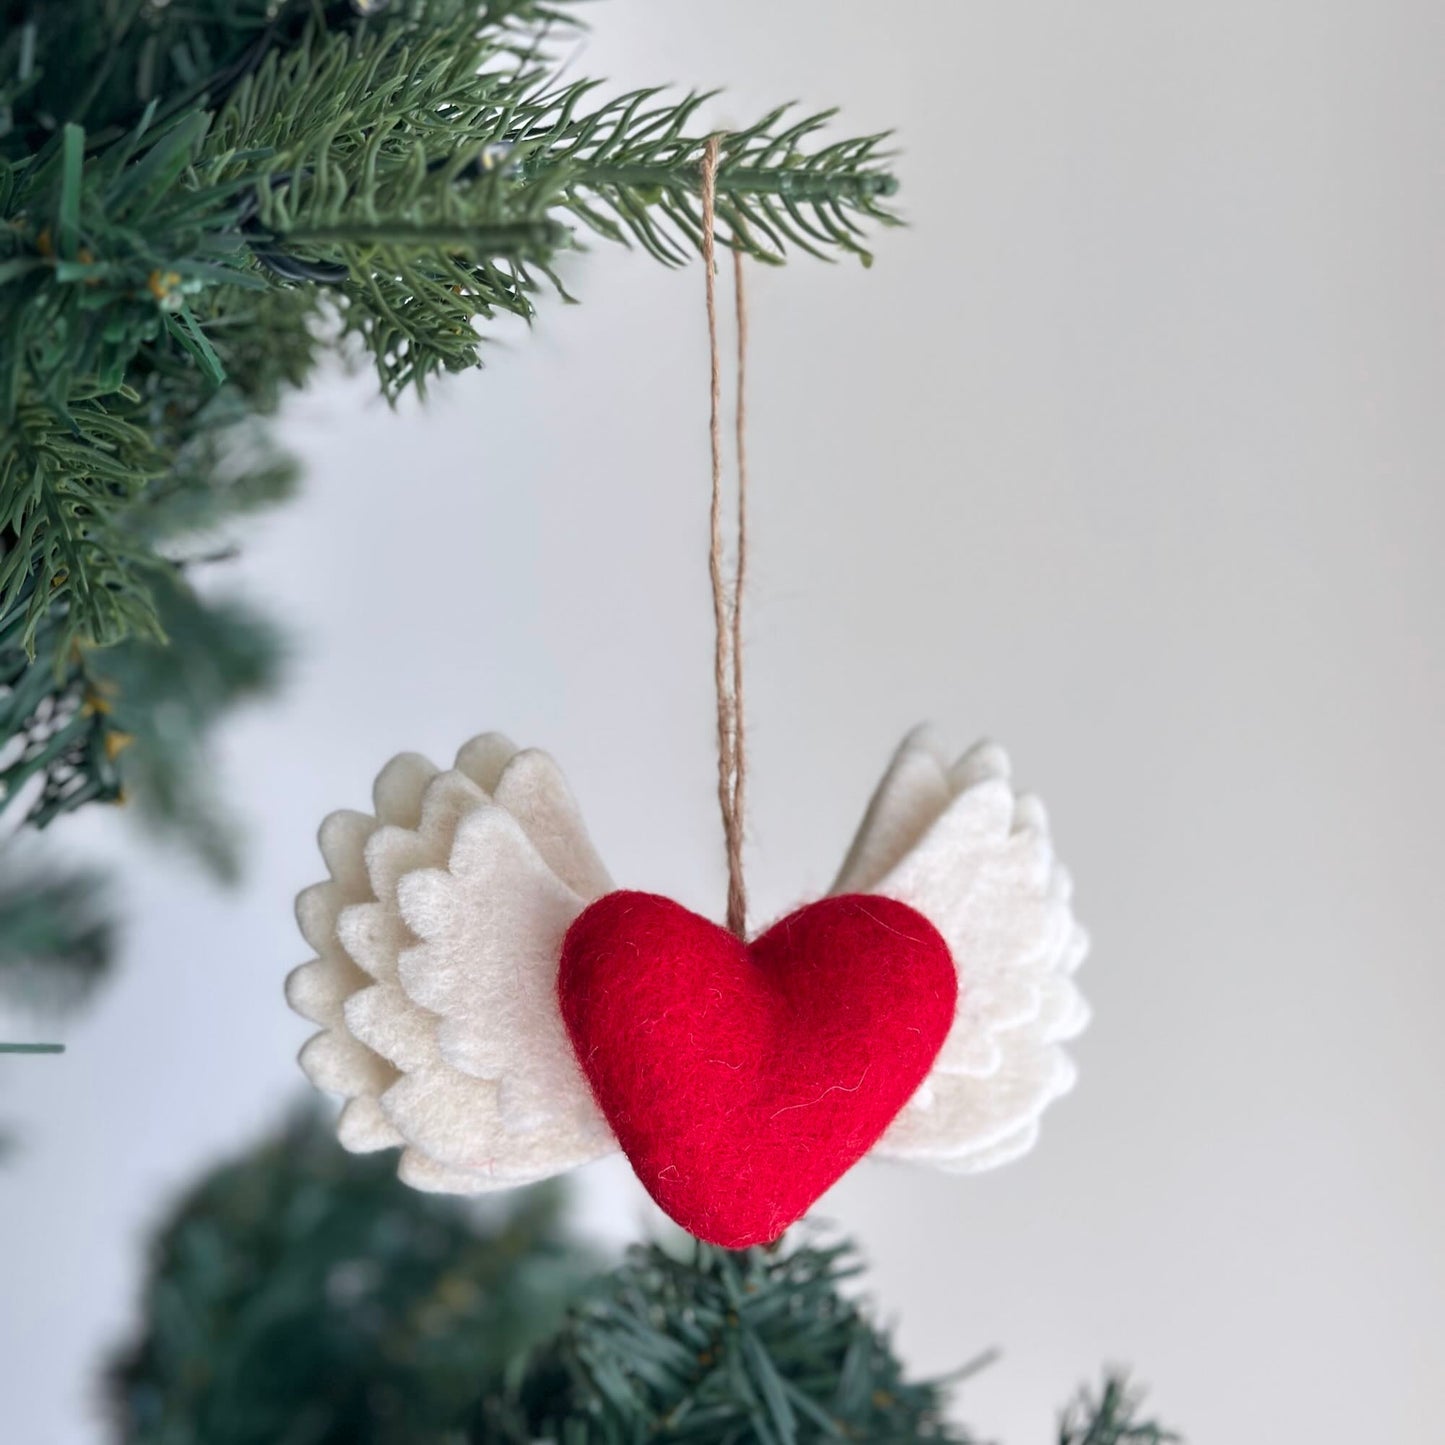 Felt Ornament - Heart with Wings Ornament